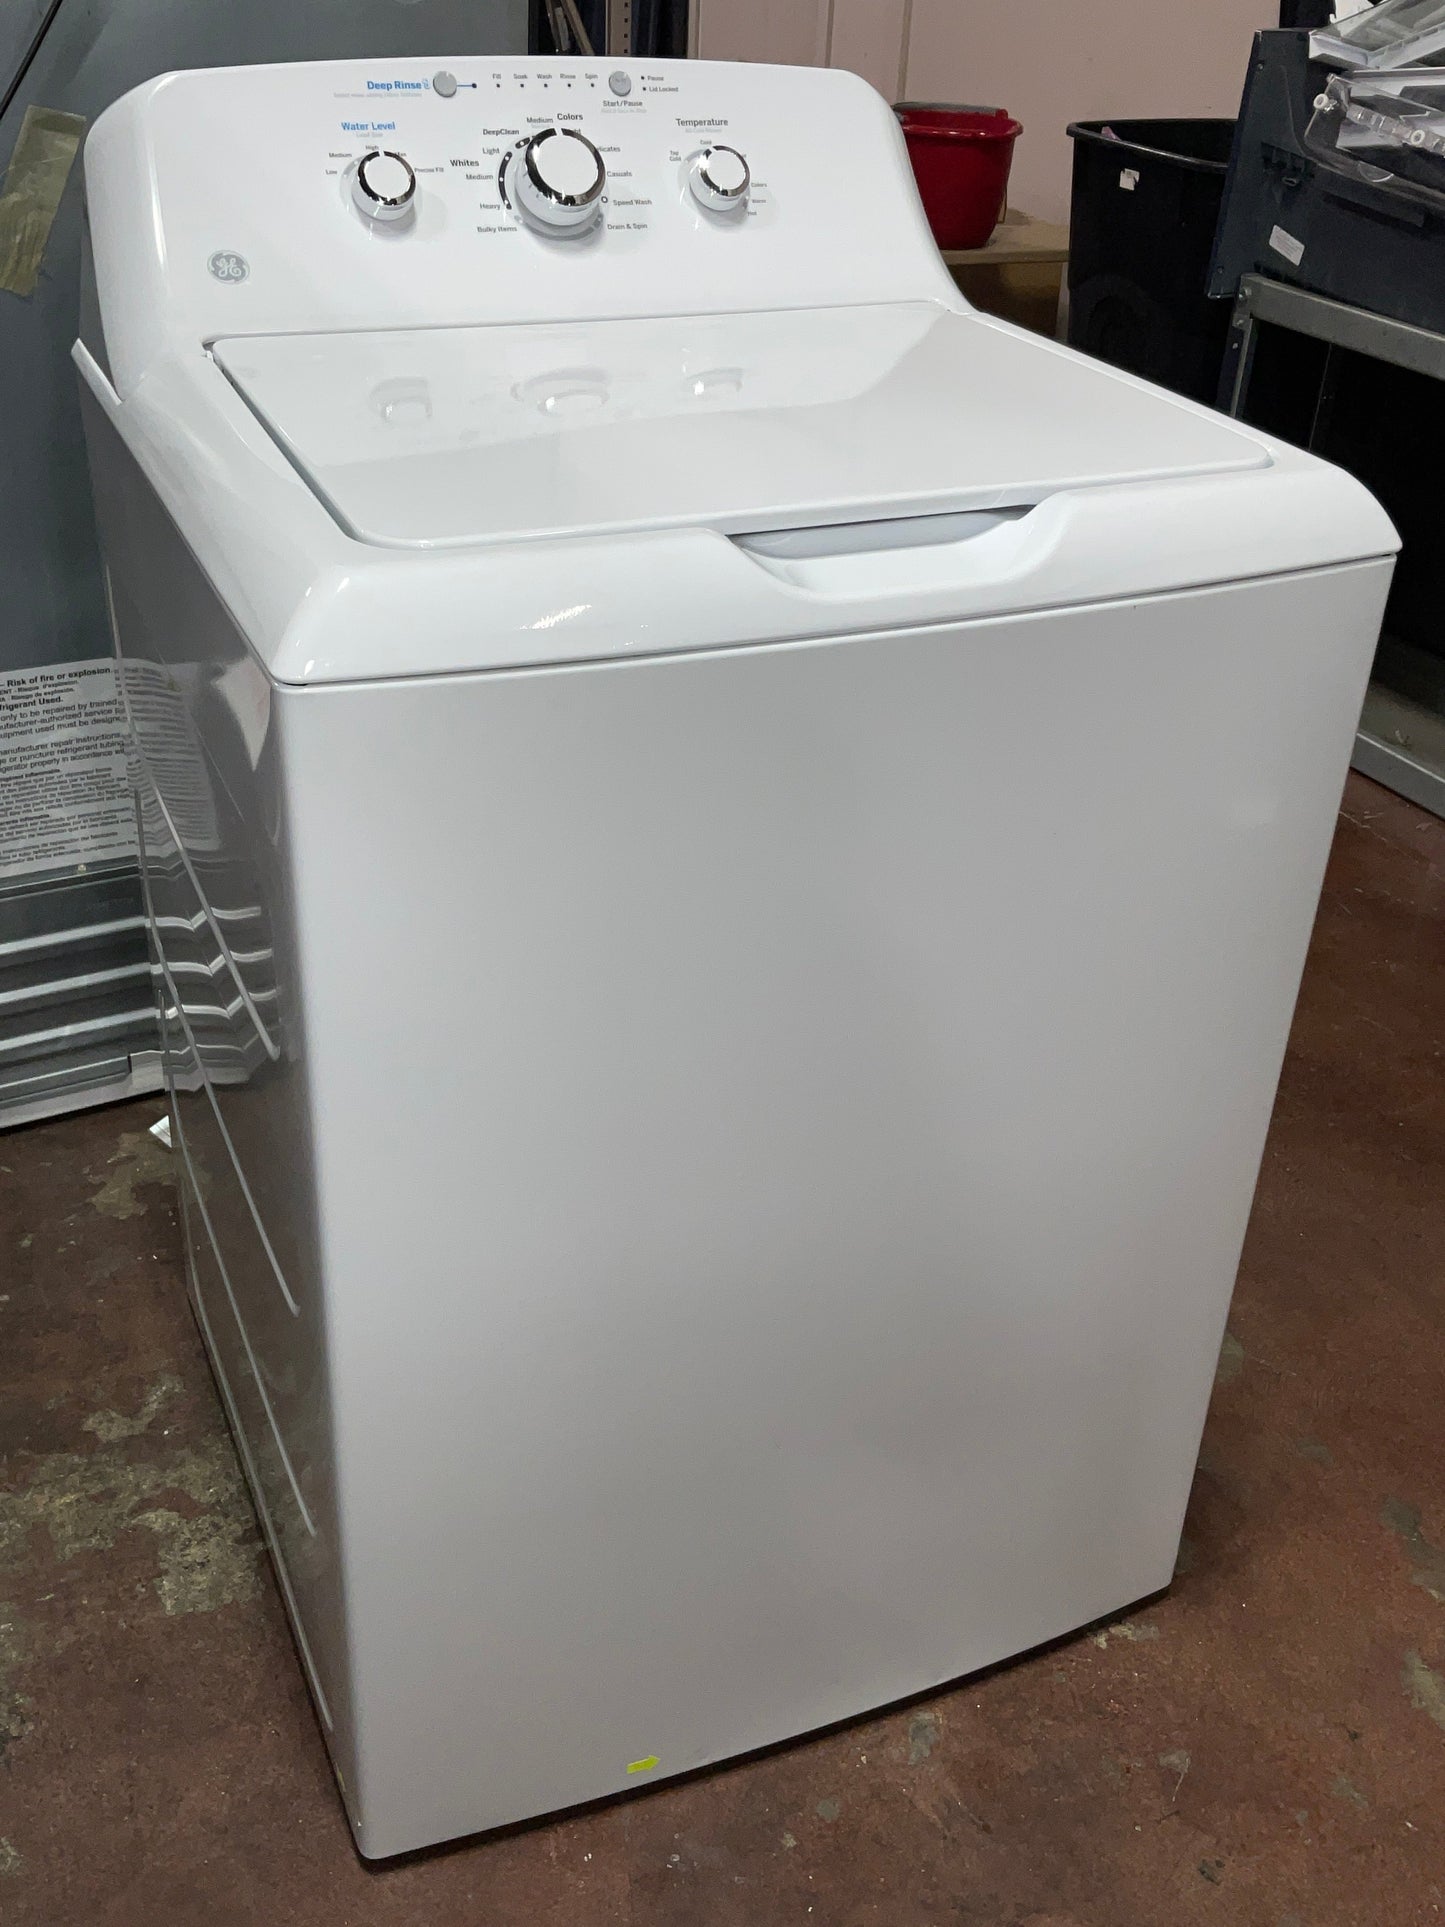 GE® 4.2 cu. ft. Capacity Washer with Stainless Steel Basket